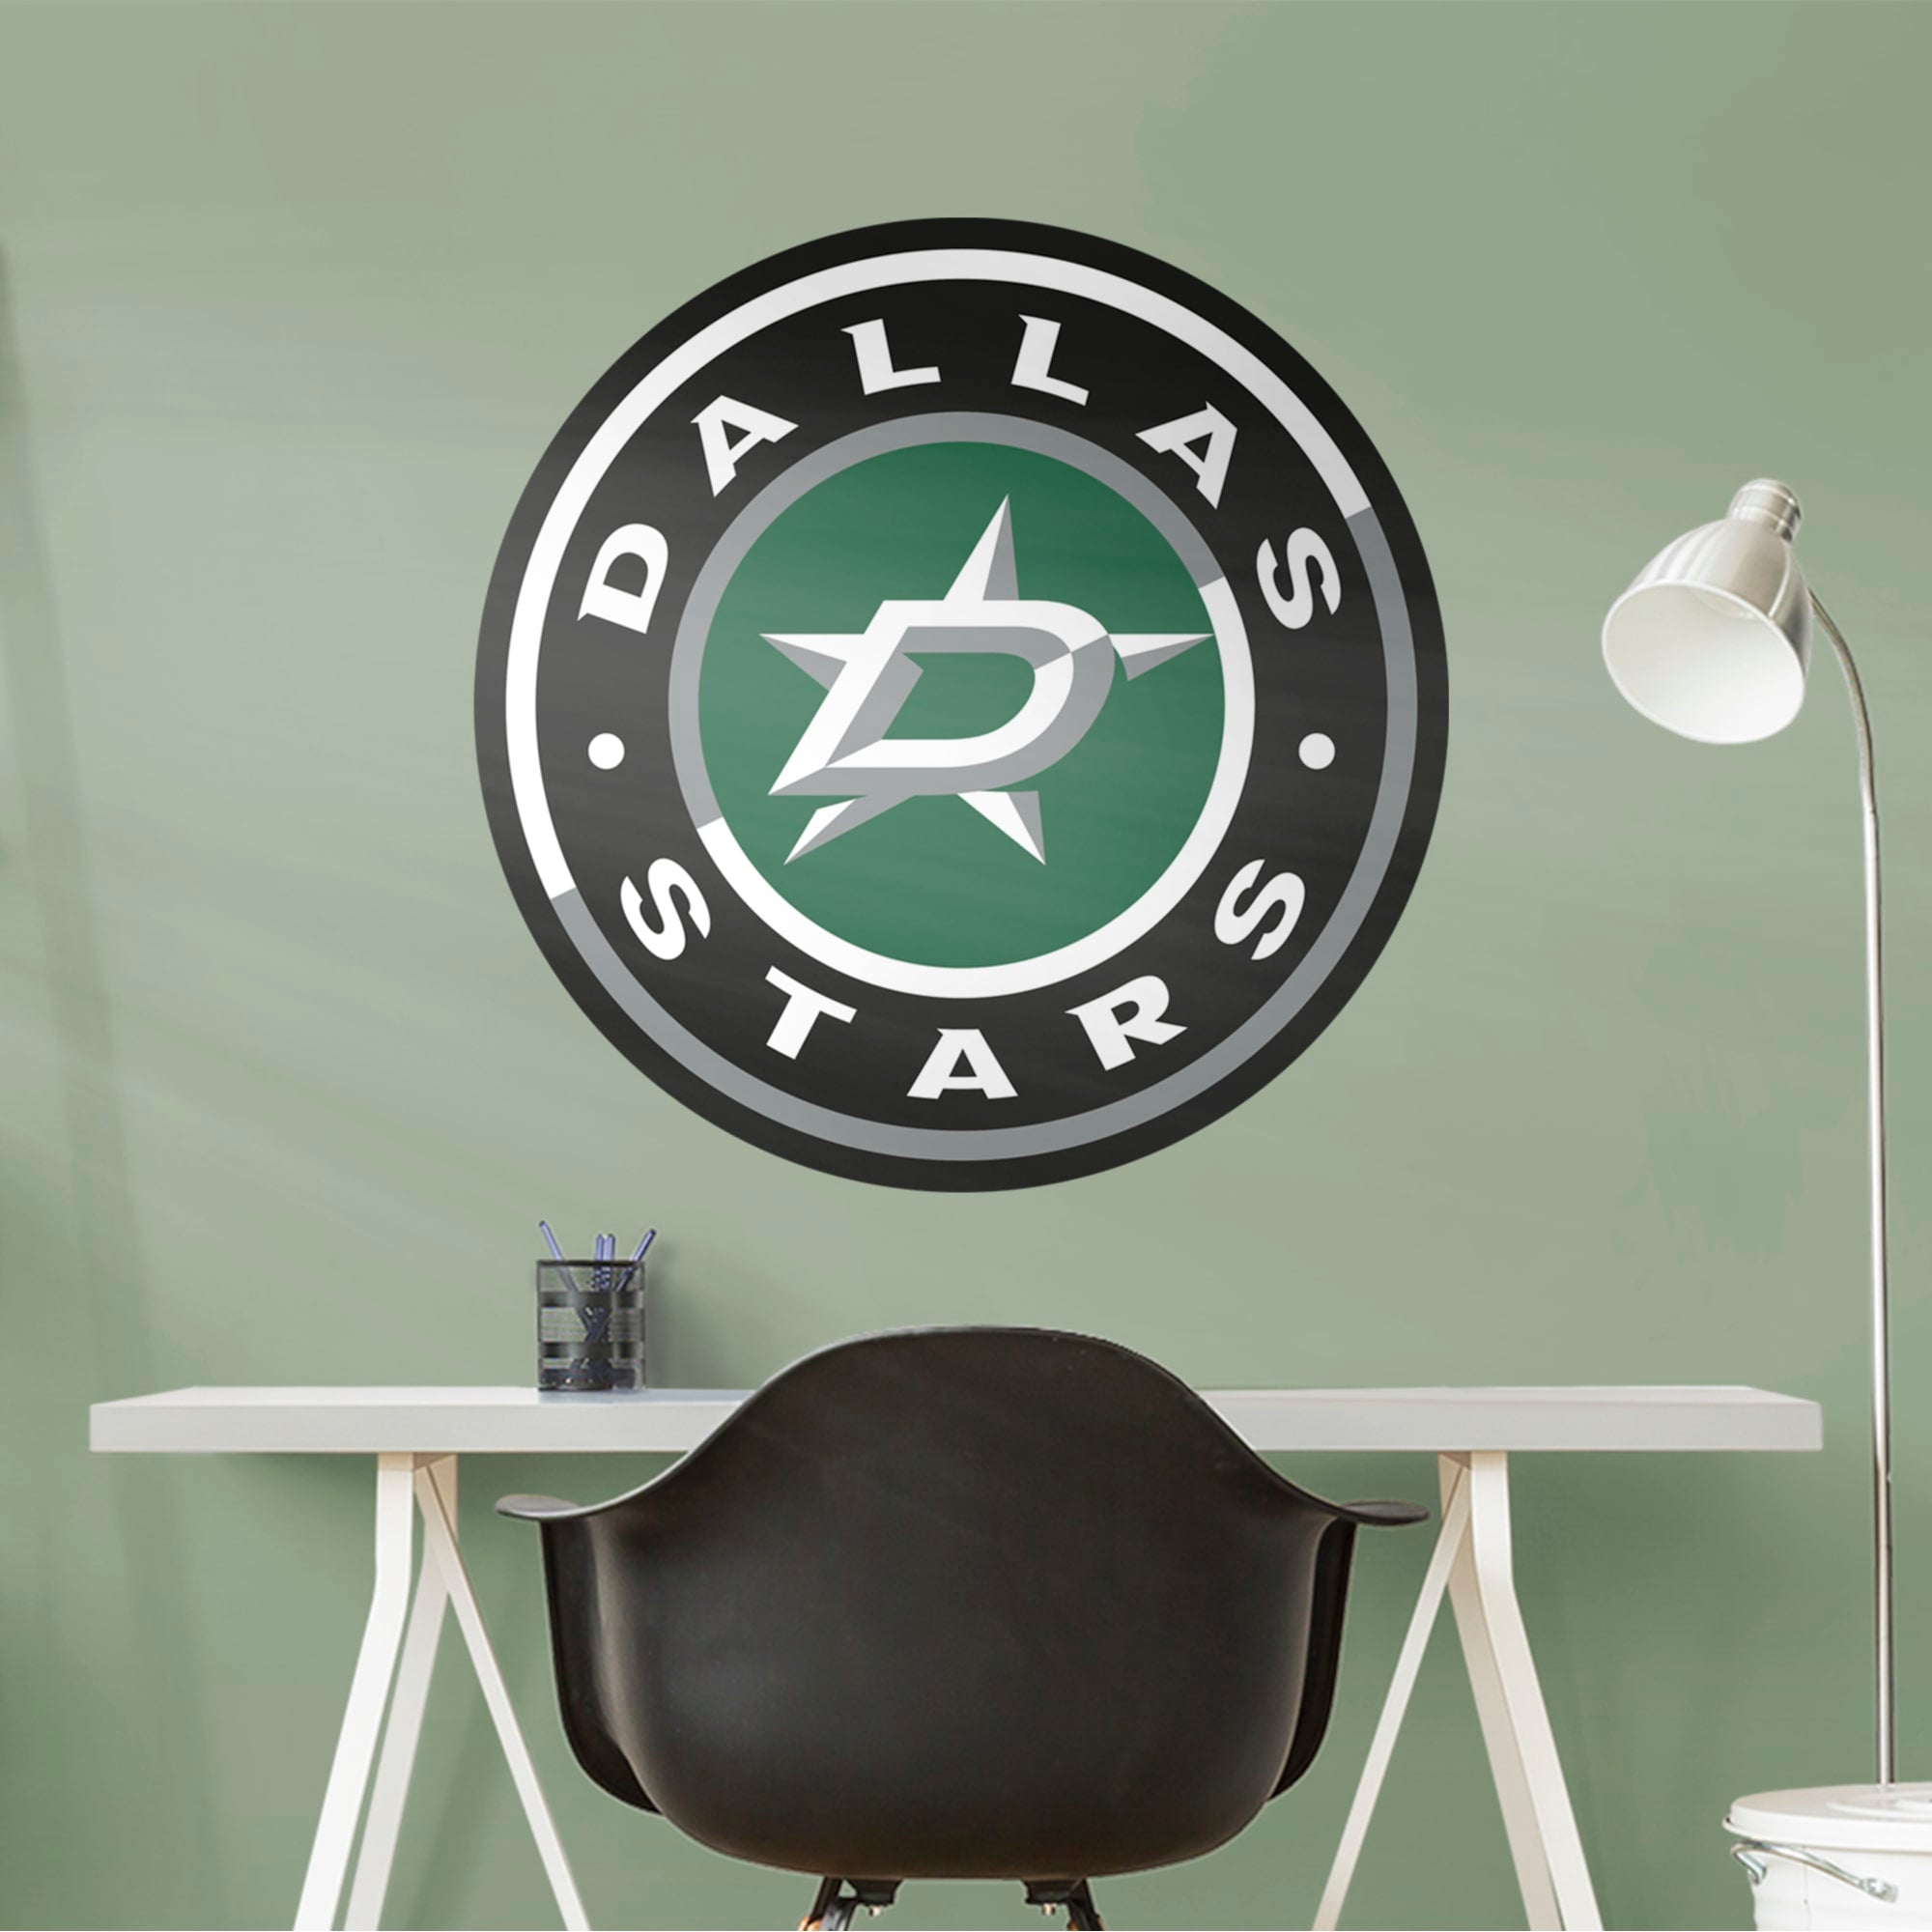 Dallas Stars: Alternate Logo - Officially Licensed NHL Removable Wall Decal 38.0"W x 38.0"H by Fathead | Vinyl